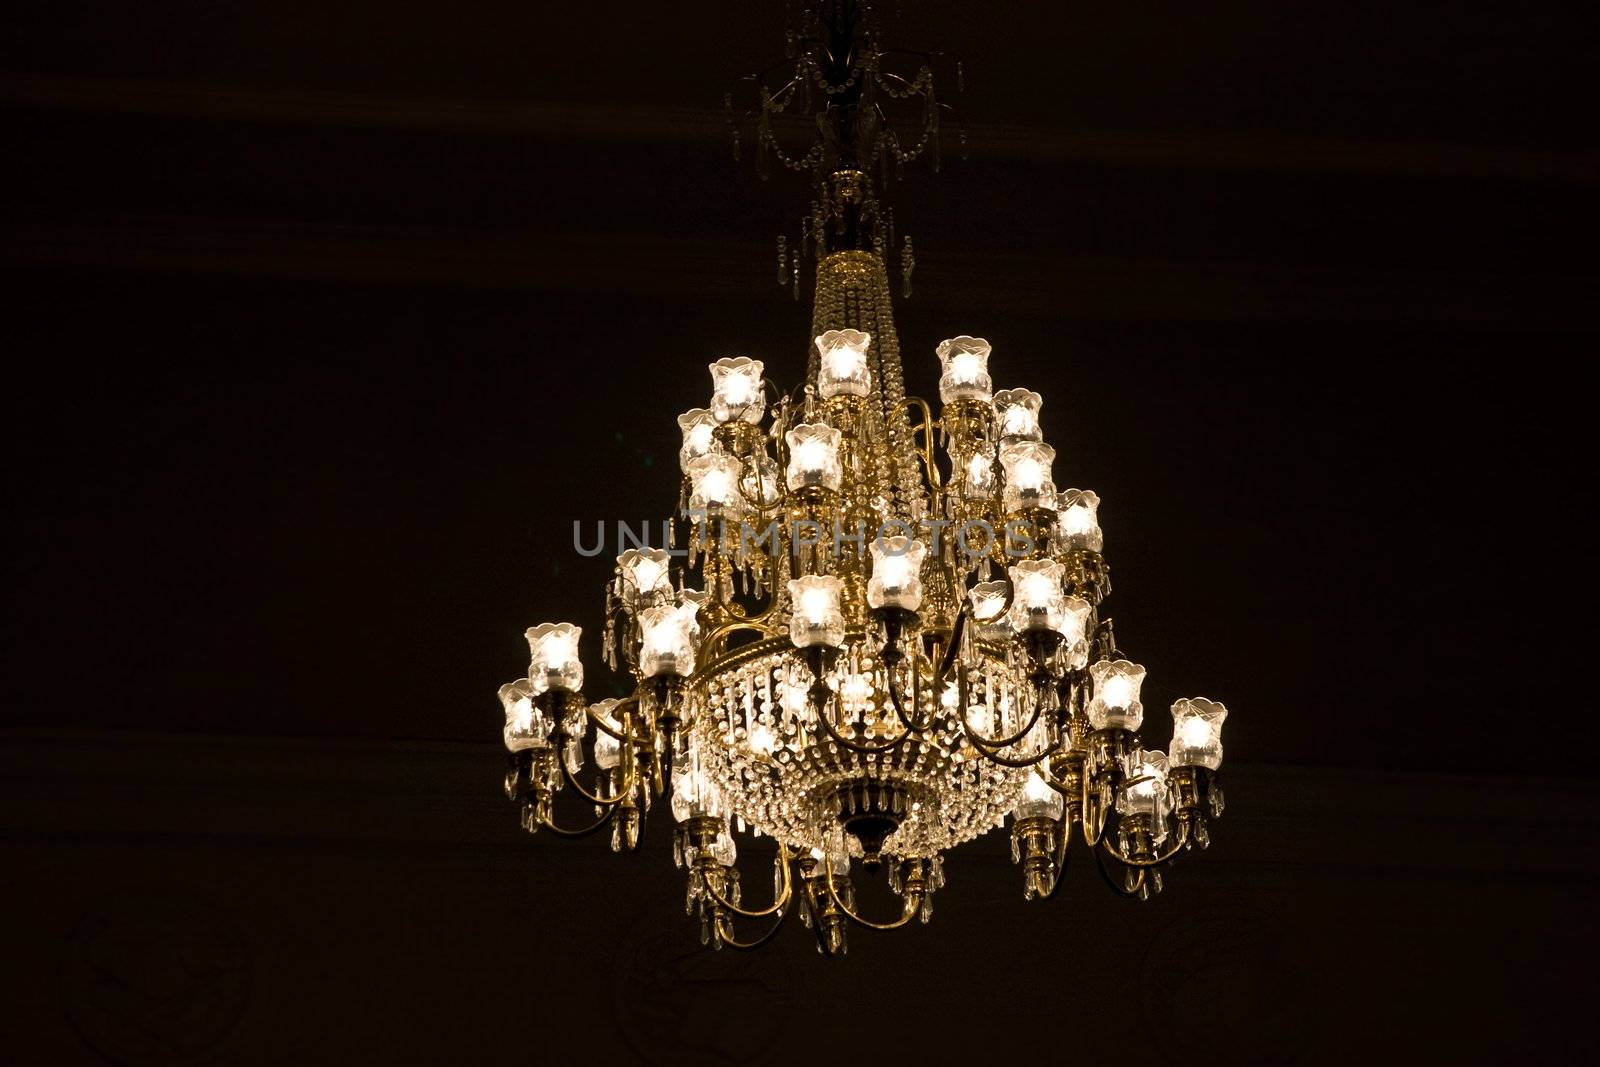 Chandelier from glass with stylish lamps over black